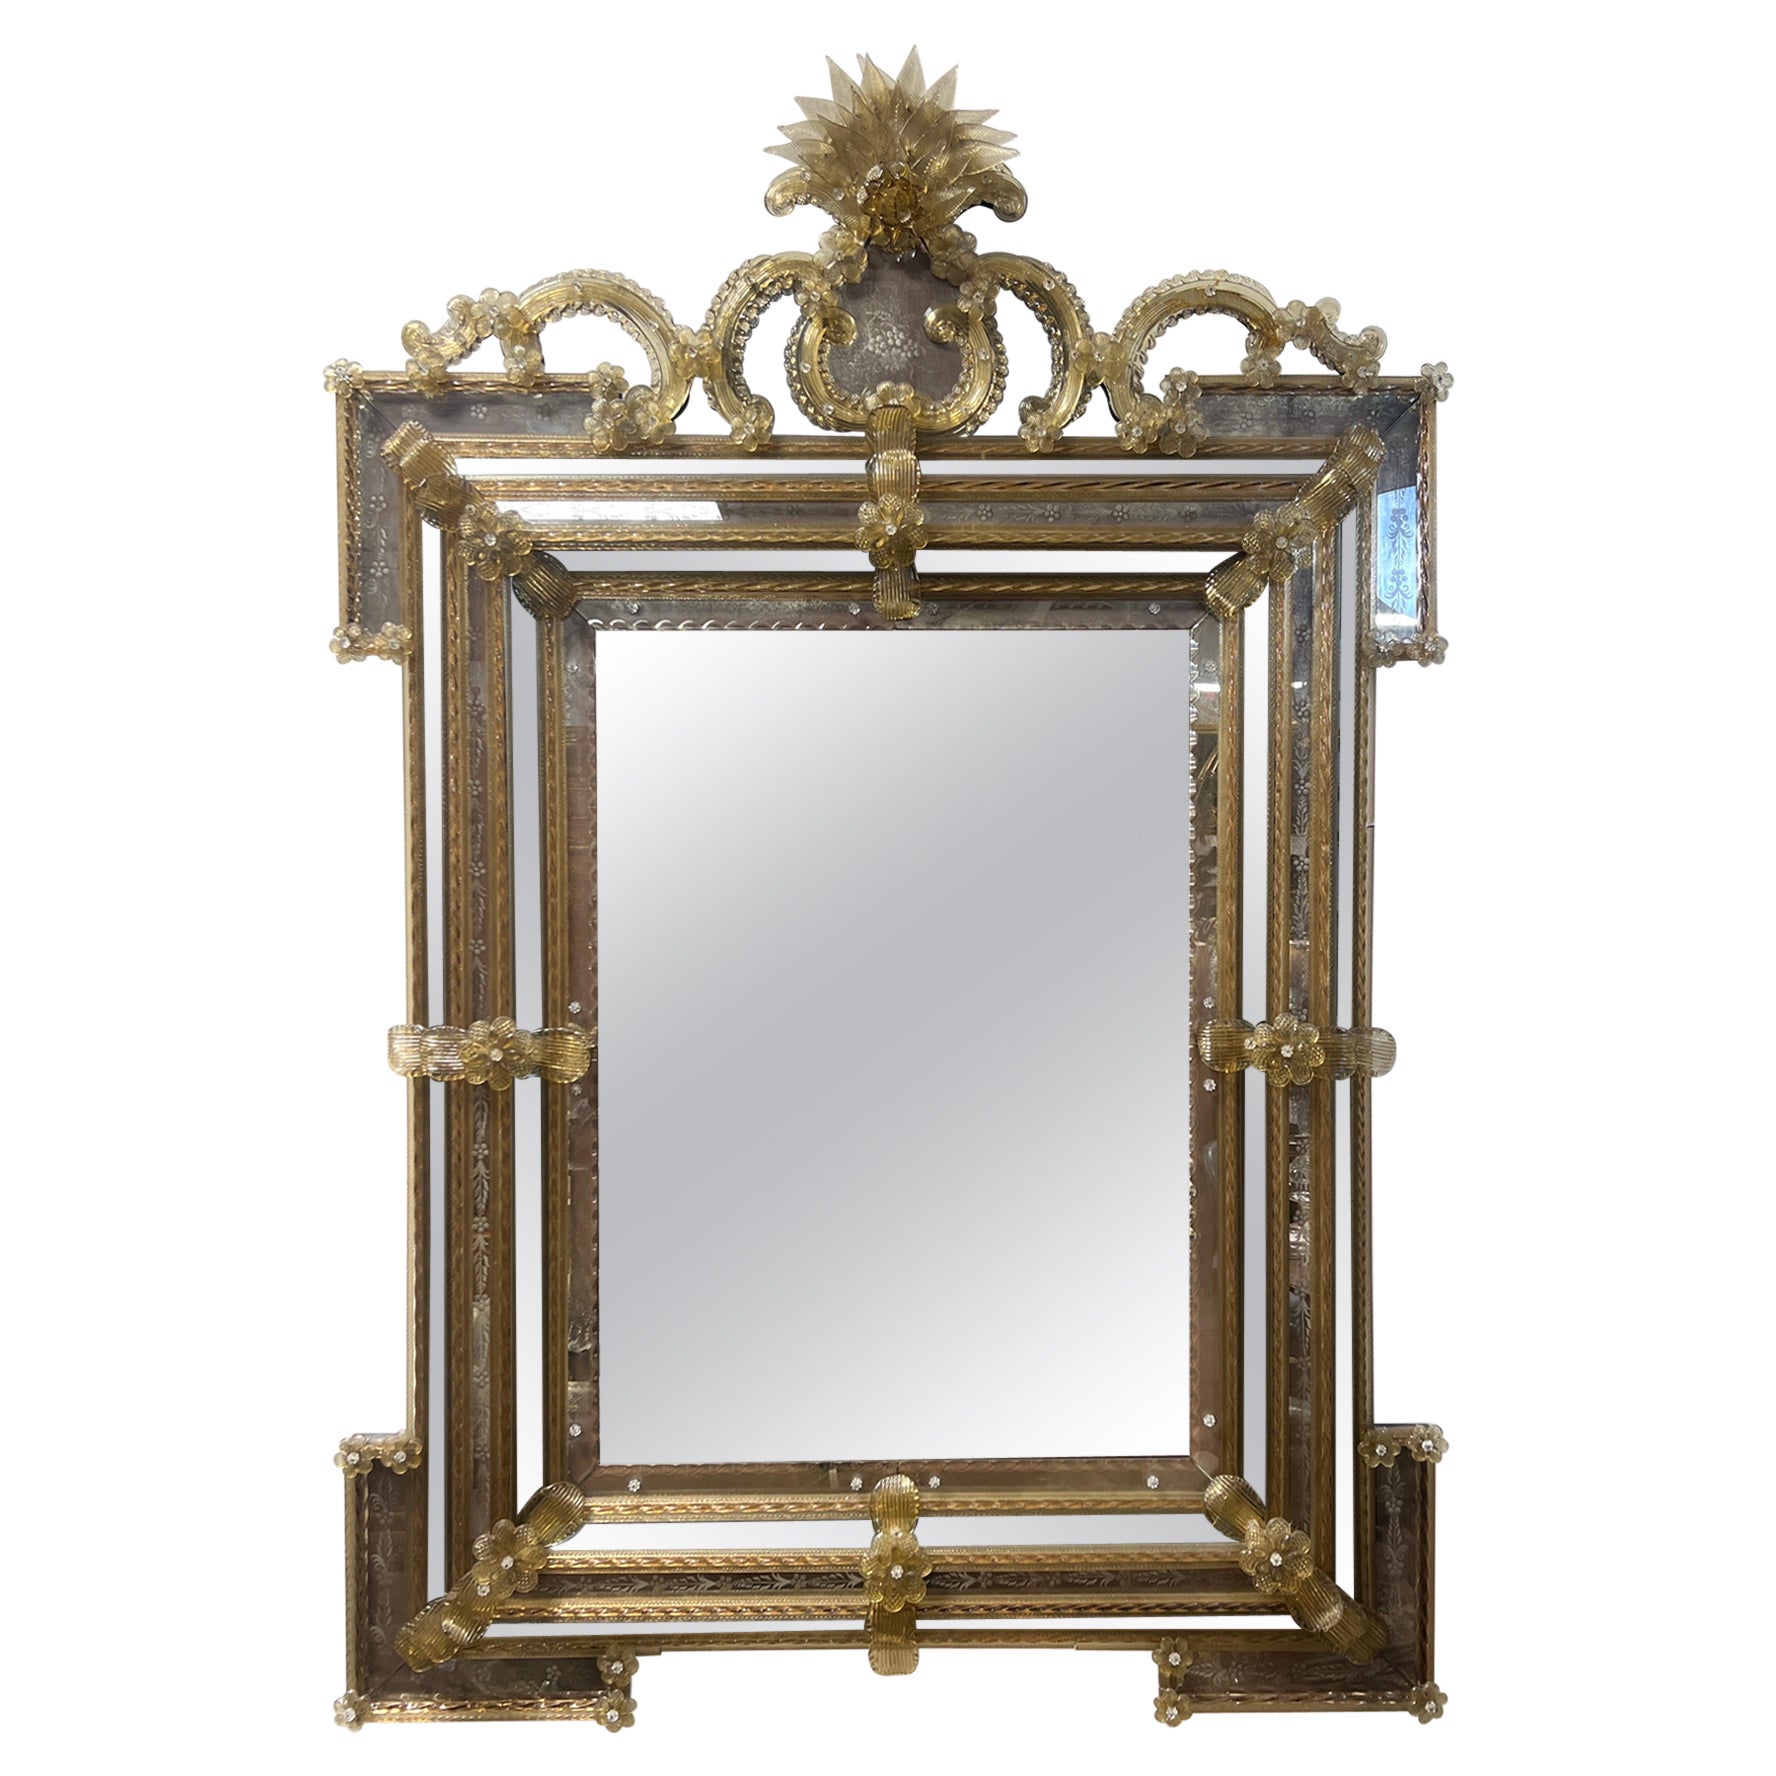 Monumental & Ornate Venetian Murano Gold Flecked Mirror W/ Etched Glass